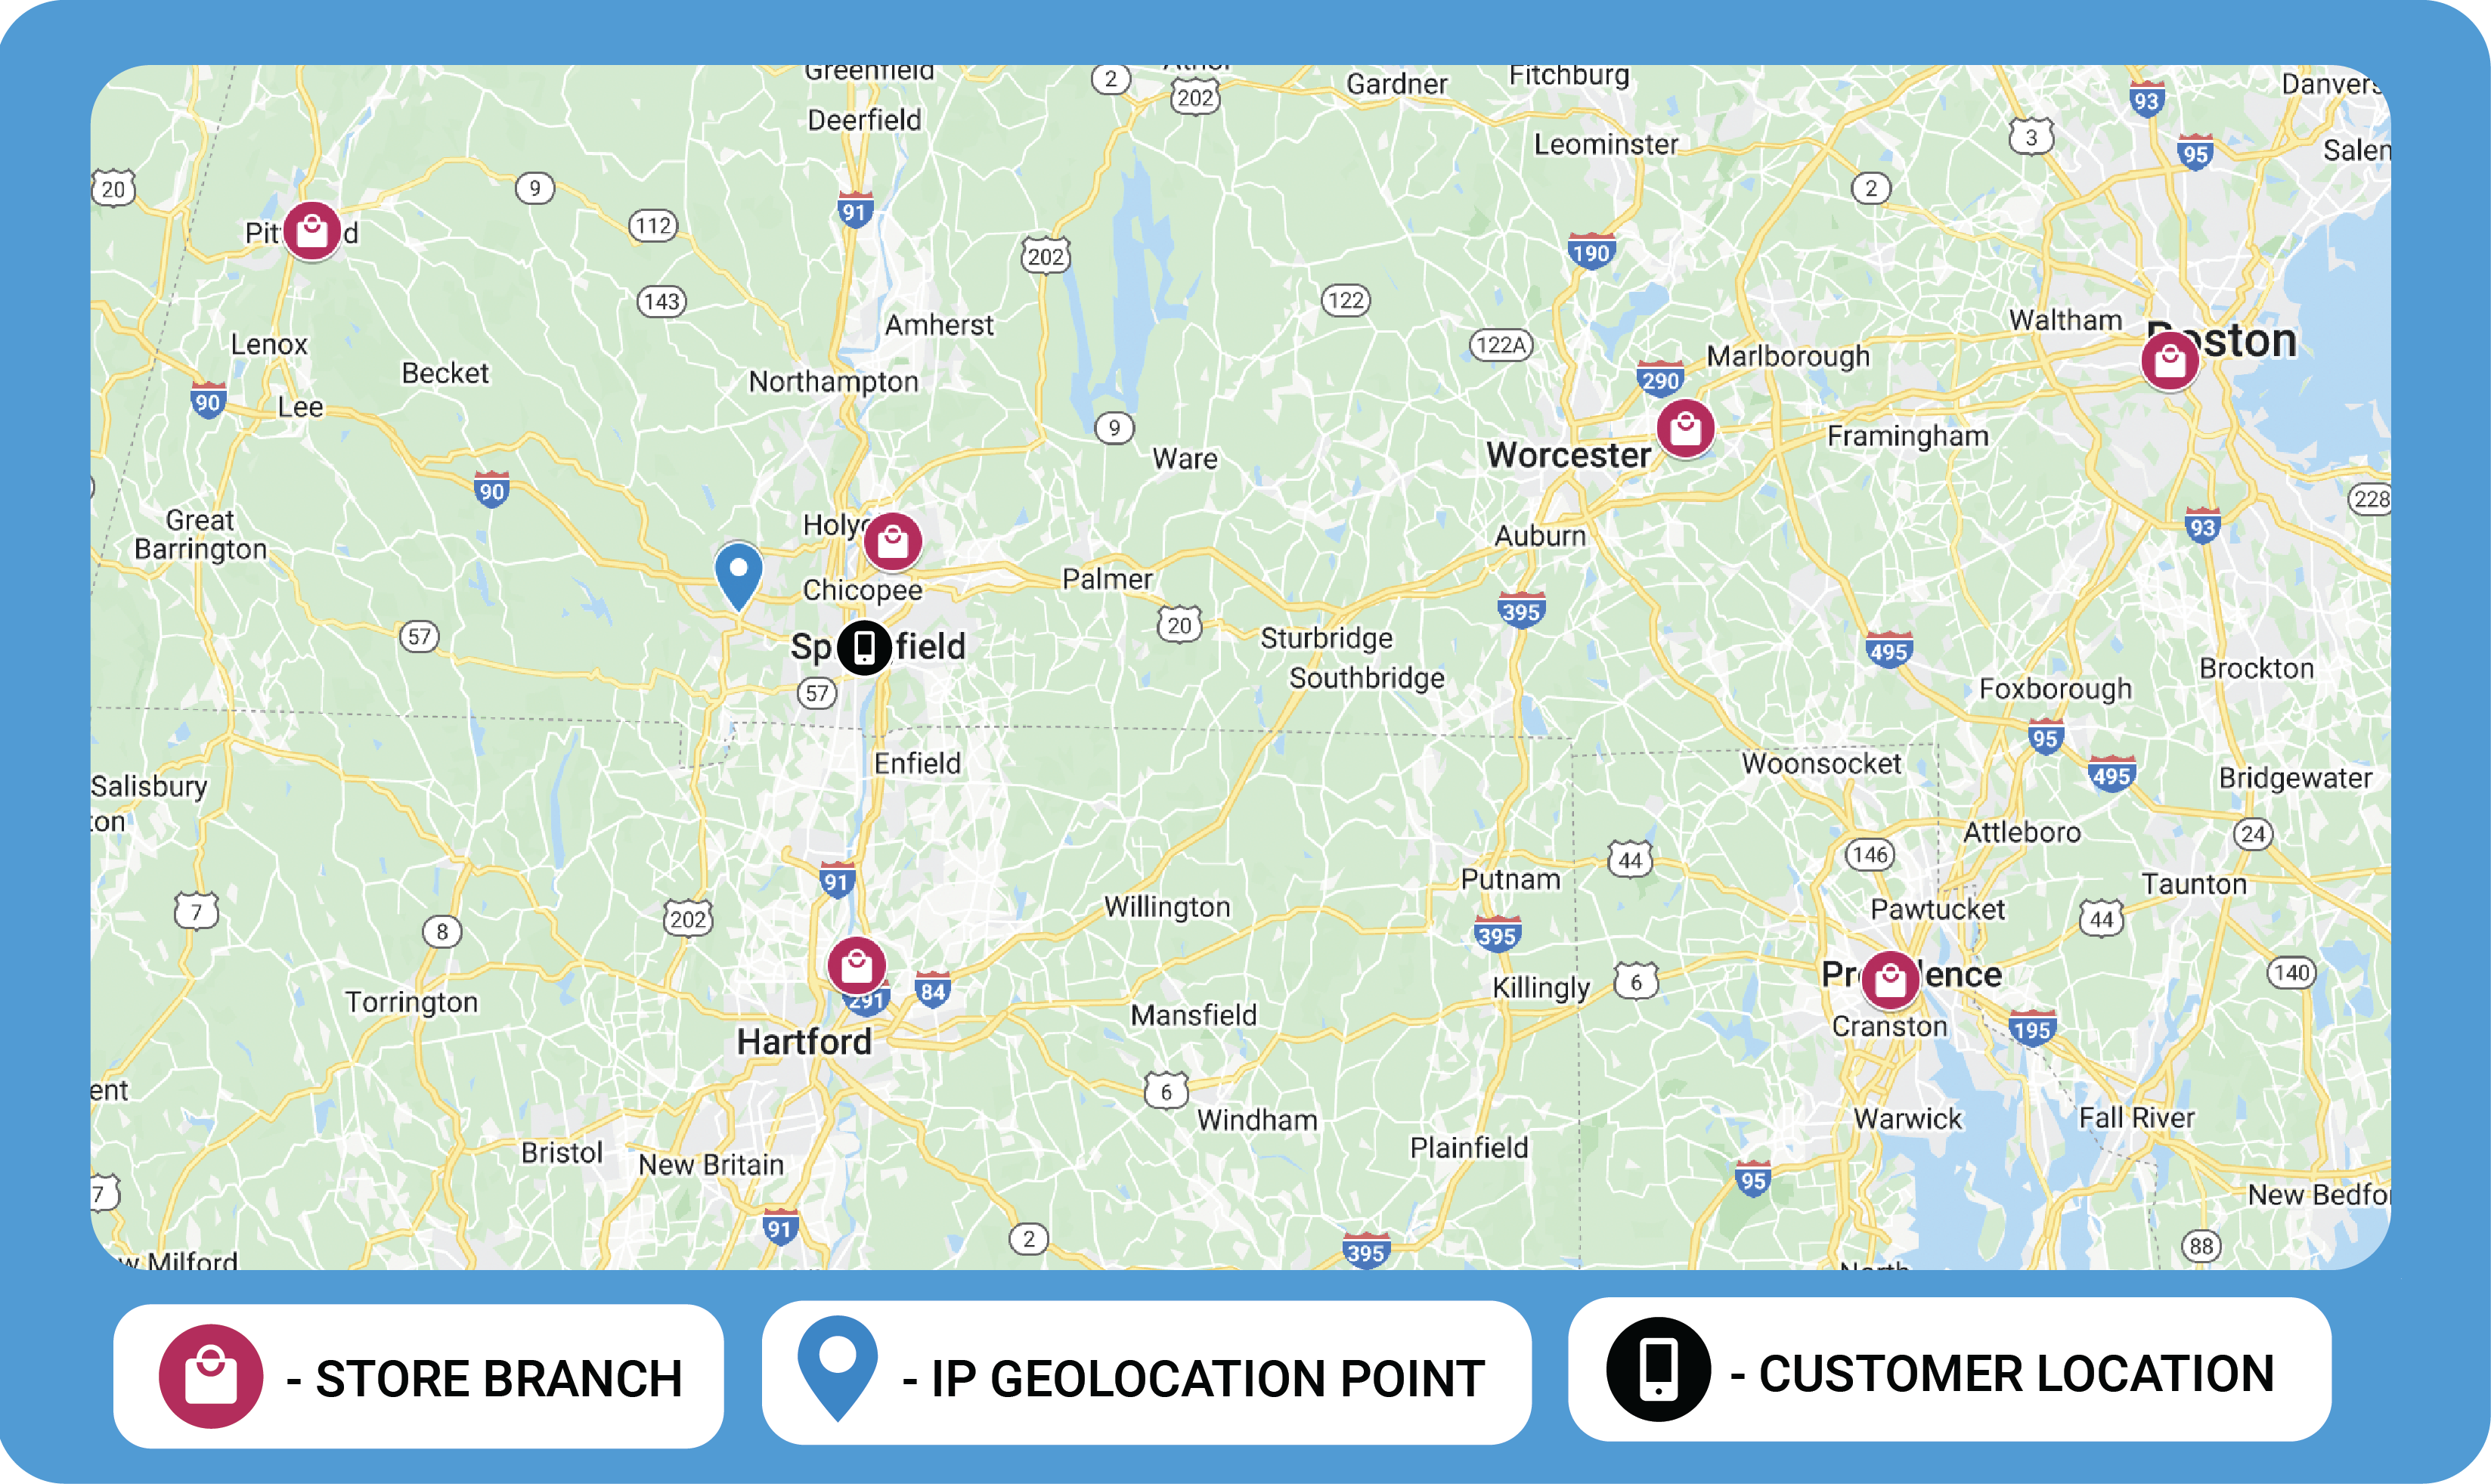 The same map of Massachusetts with store branches and IP geolocation pointmarked, as above, but this time there is also a marker for the actual customerlocation. The actual customer location marker is near the IP geolocation pointmarker, in the heart of Springfield, the largest town near the IP geolocationpoint.